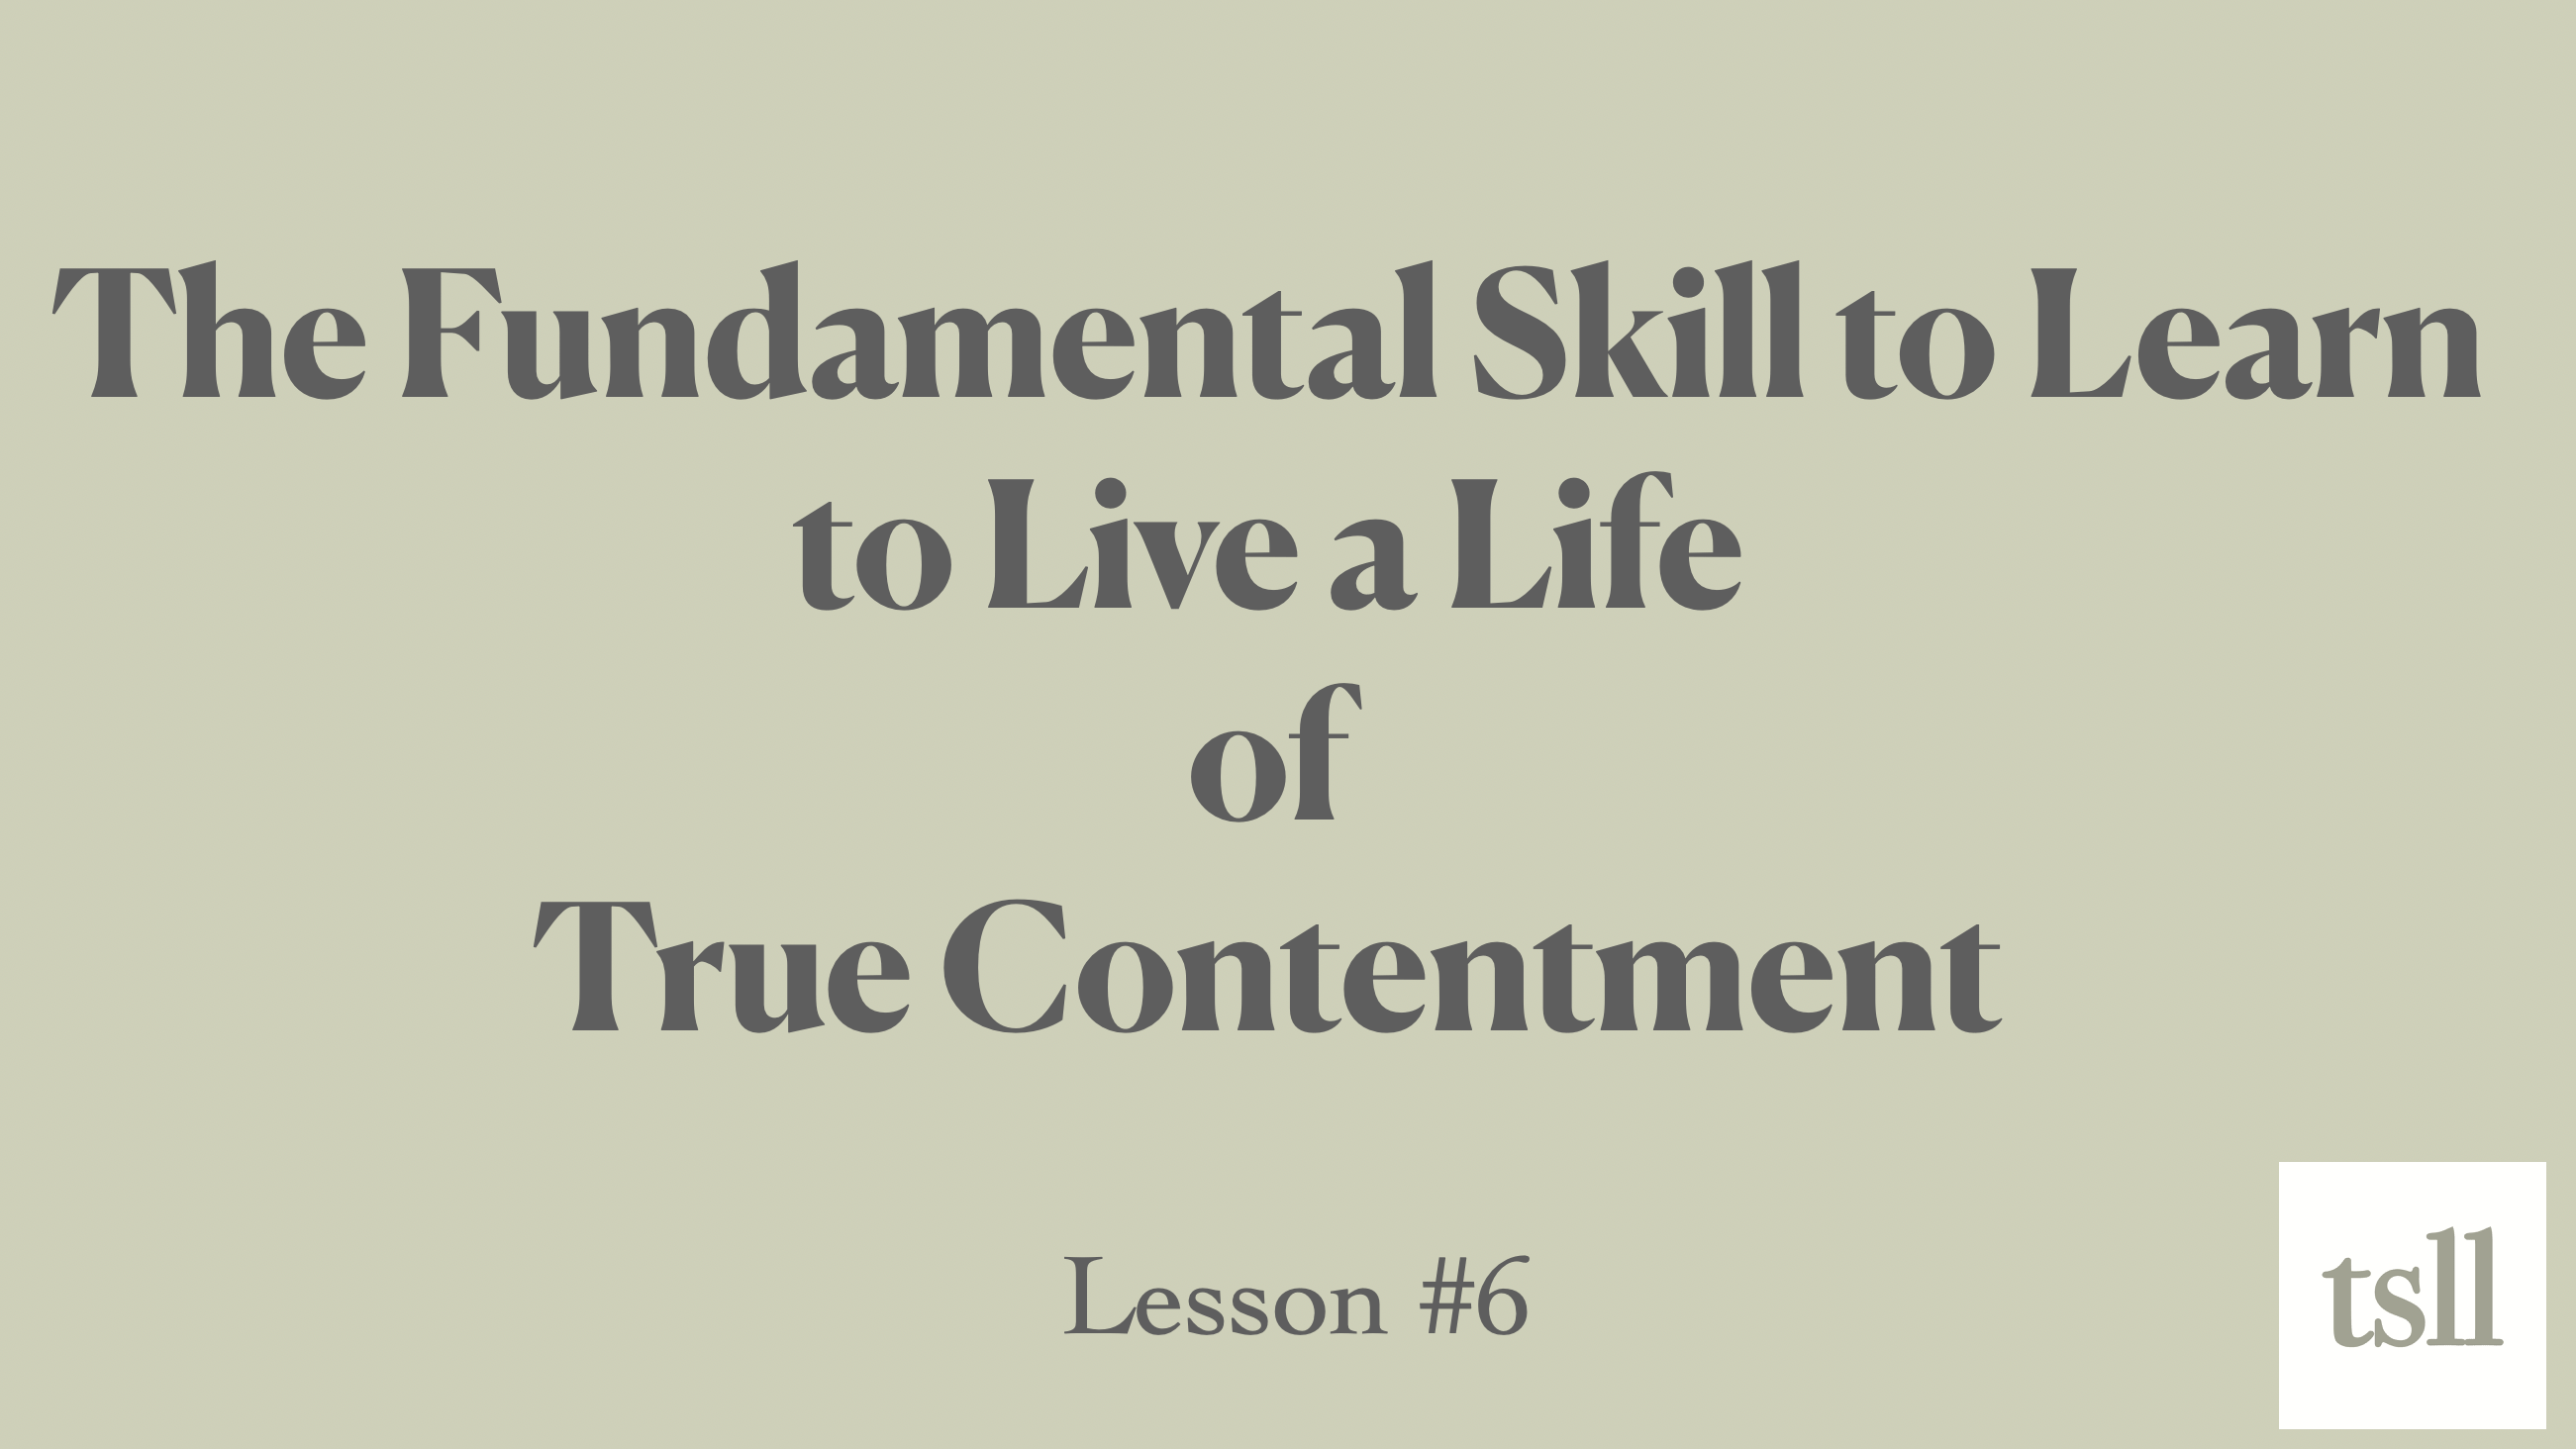 Part 1: A Fundamental Skill to Learn to Live a Life of True Contentment (8:29)